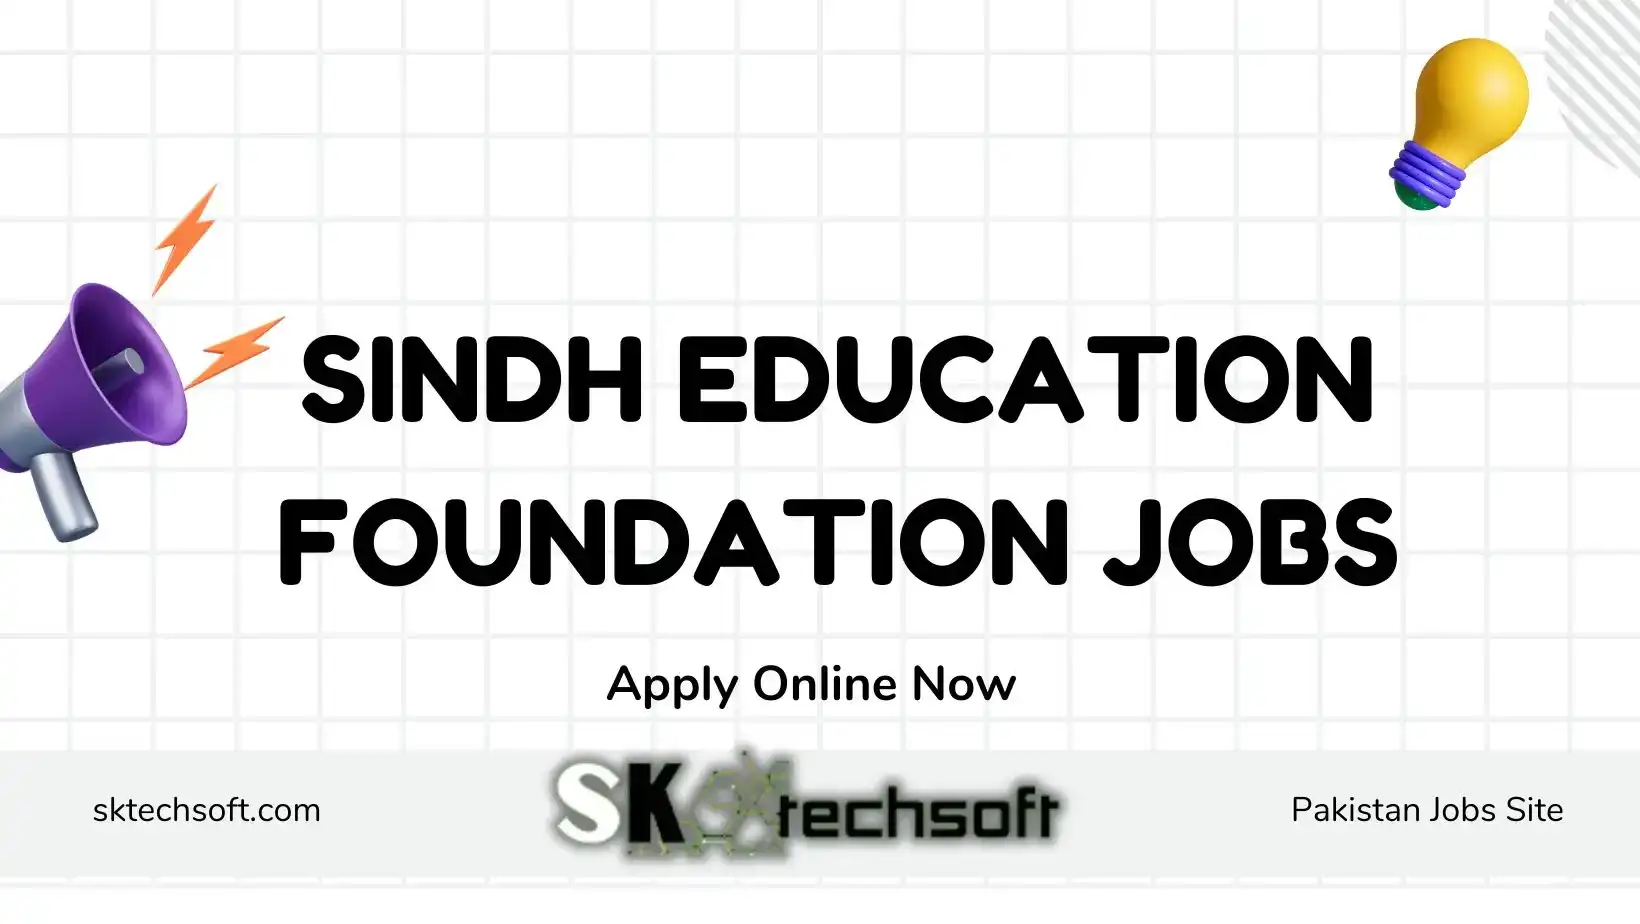 The Sindh Education Foundation (SEF), established under the 1992 Act, aims to improve education in Sindh through interventions like Foundation Assisted Schools, Public-Private Partnership, Non-Formal Education, and Youth Education Employment Empowerment Project.